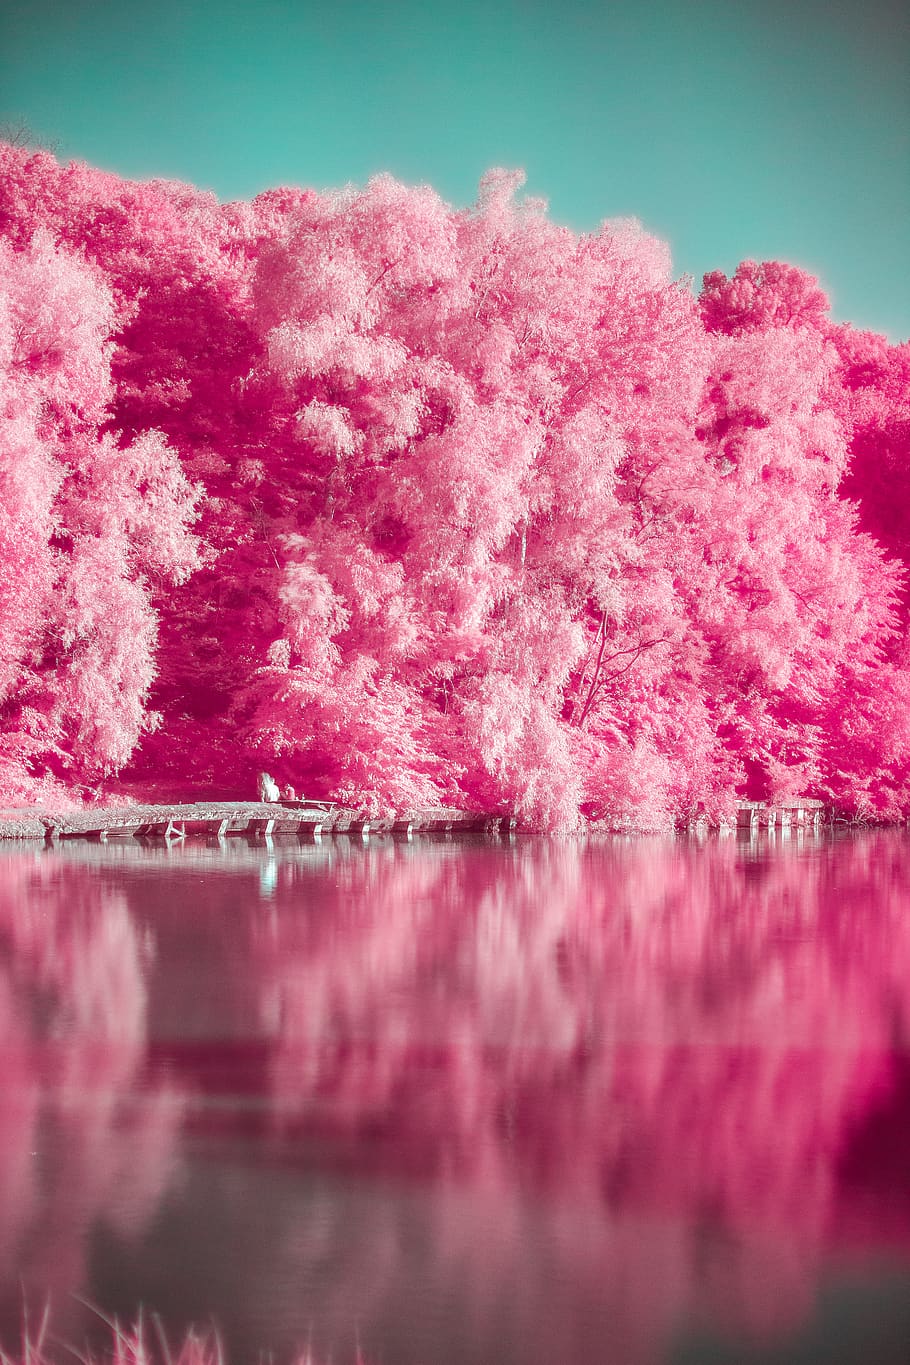 pink trees beside body of water during daytime, pink color, reflection